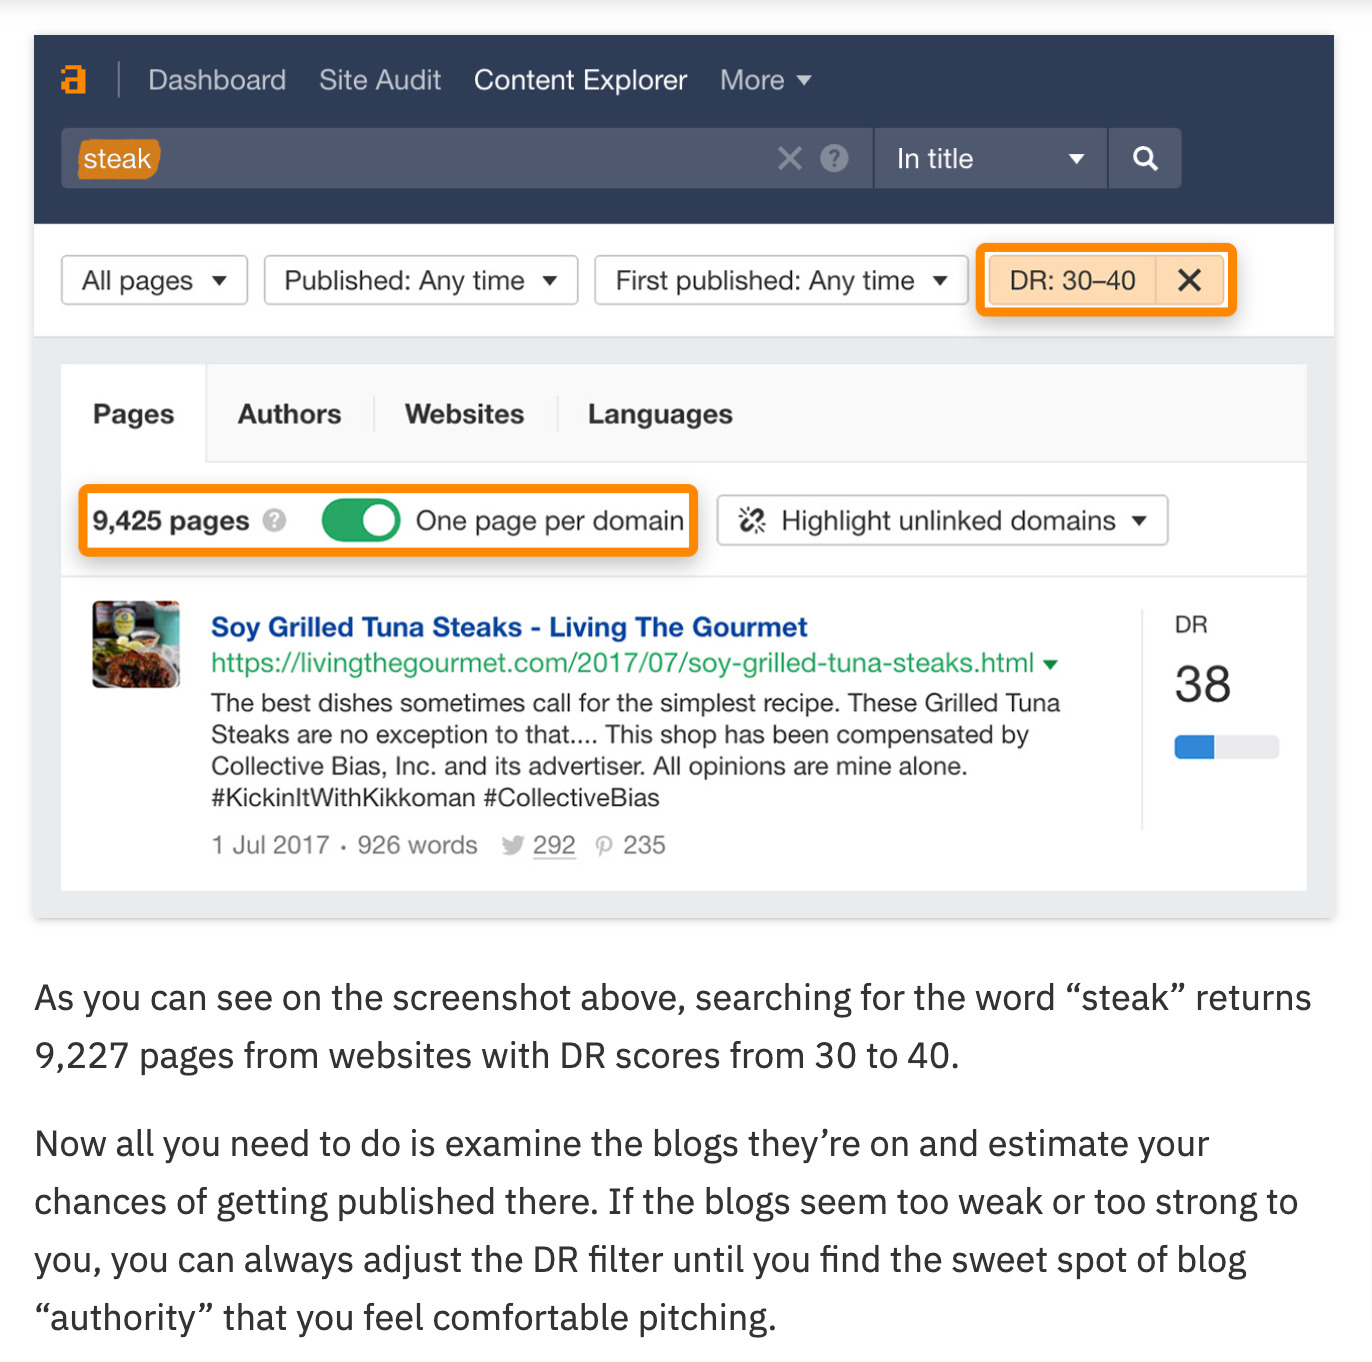 Excerpt from an Ahrefs blog post about Content Explorer 